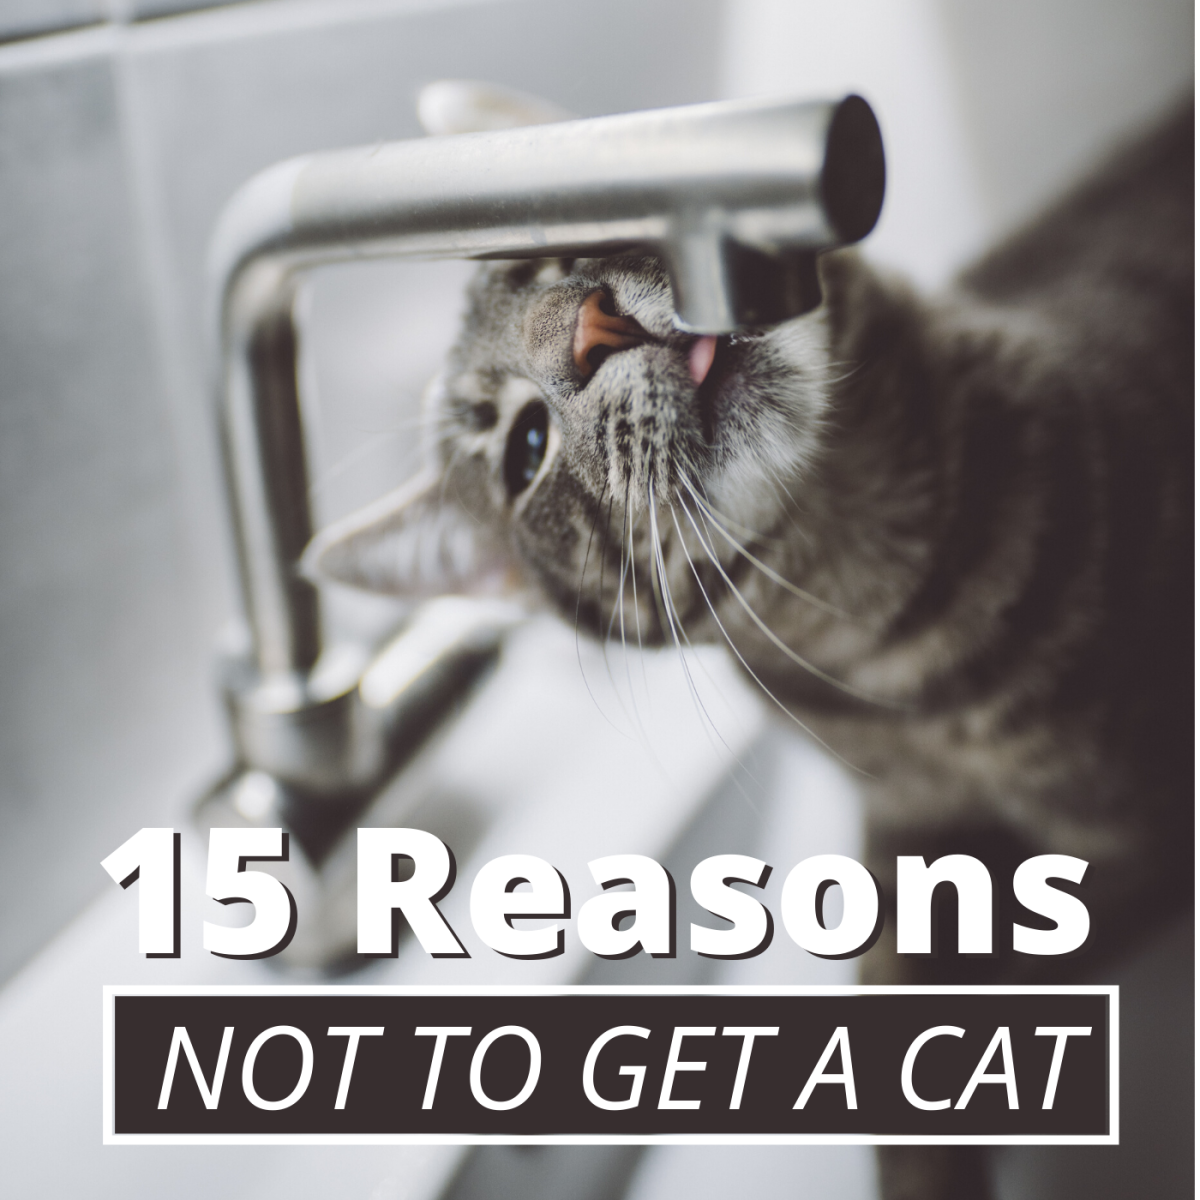 Cat ownership can be a wonderful experience, but it comes with plenty of downsides that many folks fail to consider. 